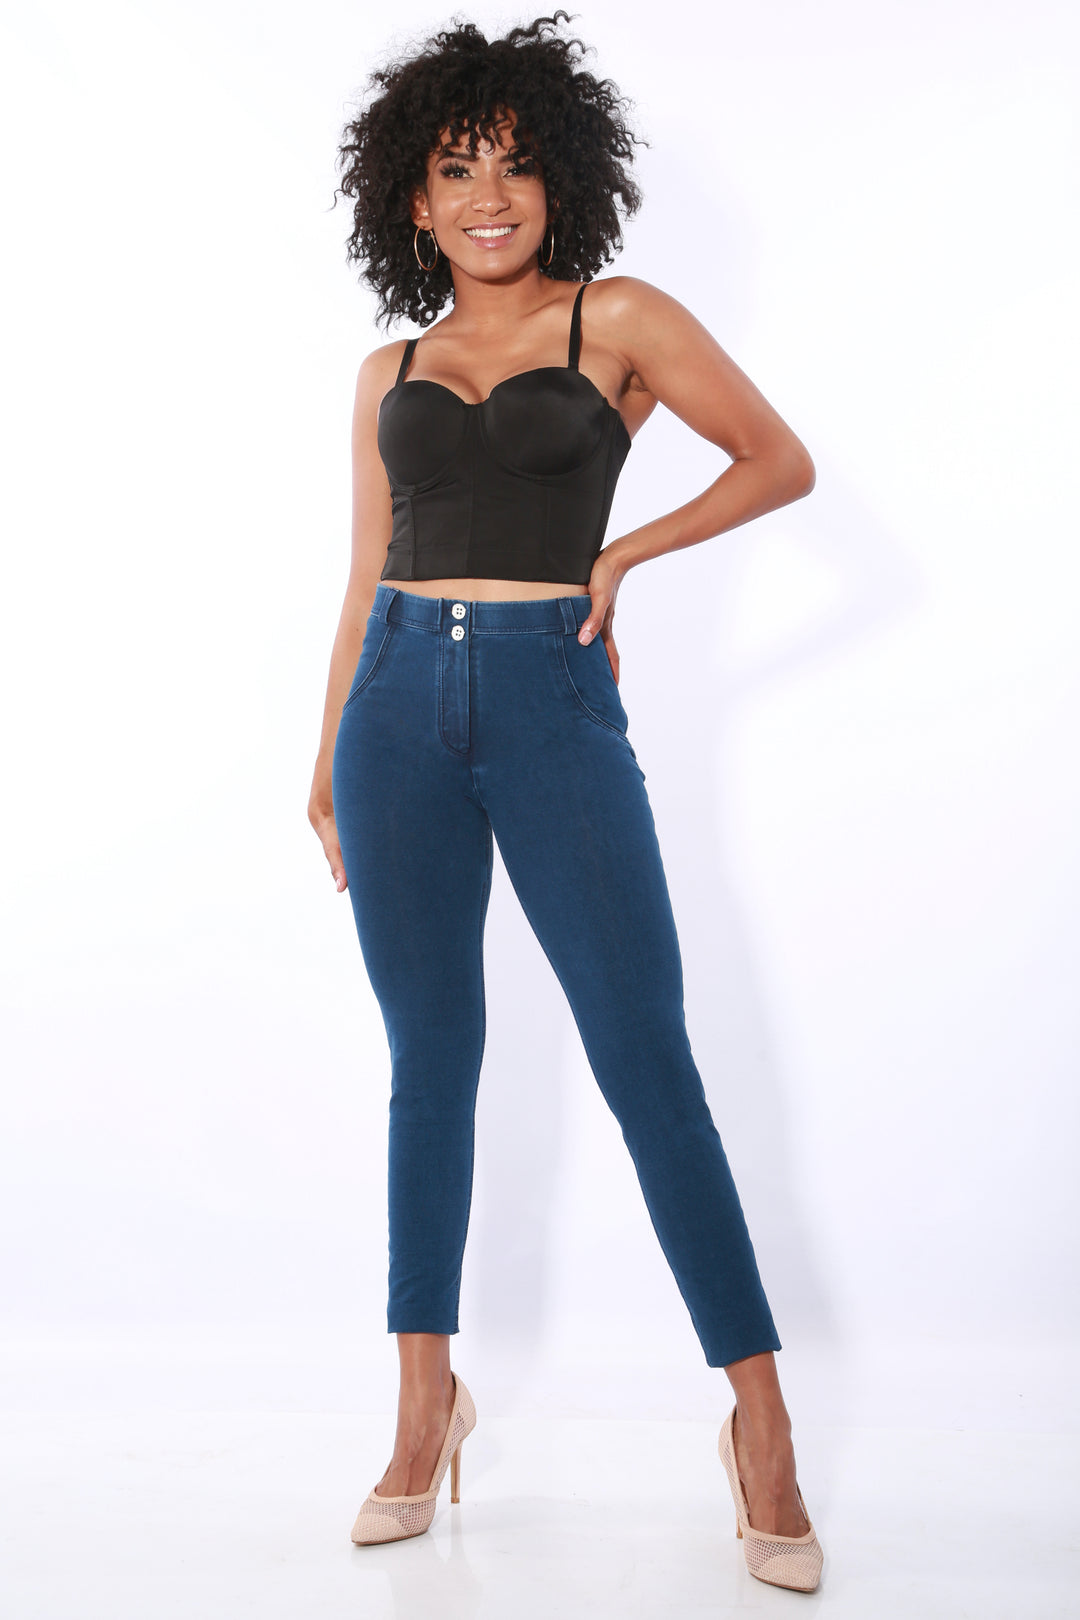 Shop new Jeans, Pants, dresses and Shapewear in South Africa – Shape Wear  Shop